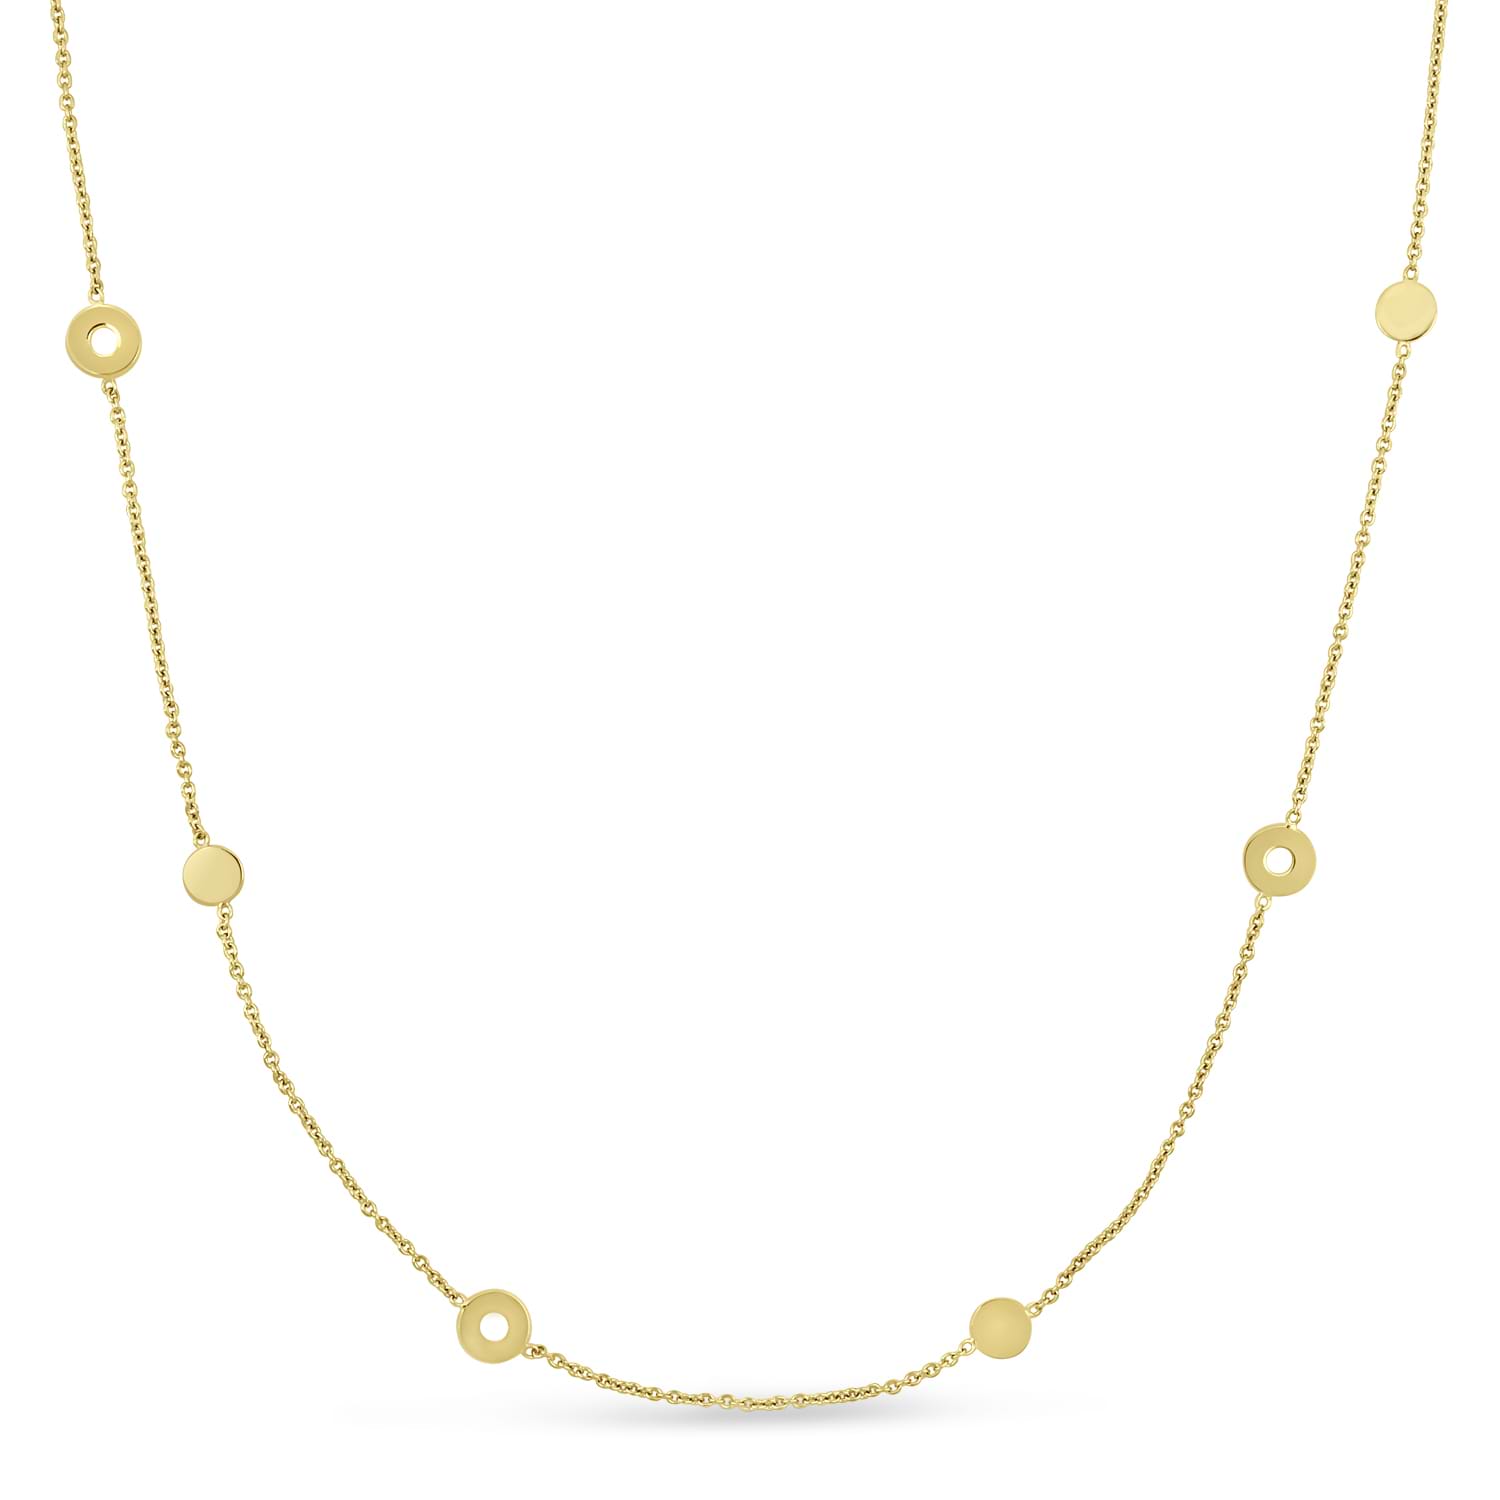 Fancy Circles Necklace 18k Yellow Gold